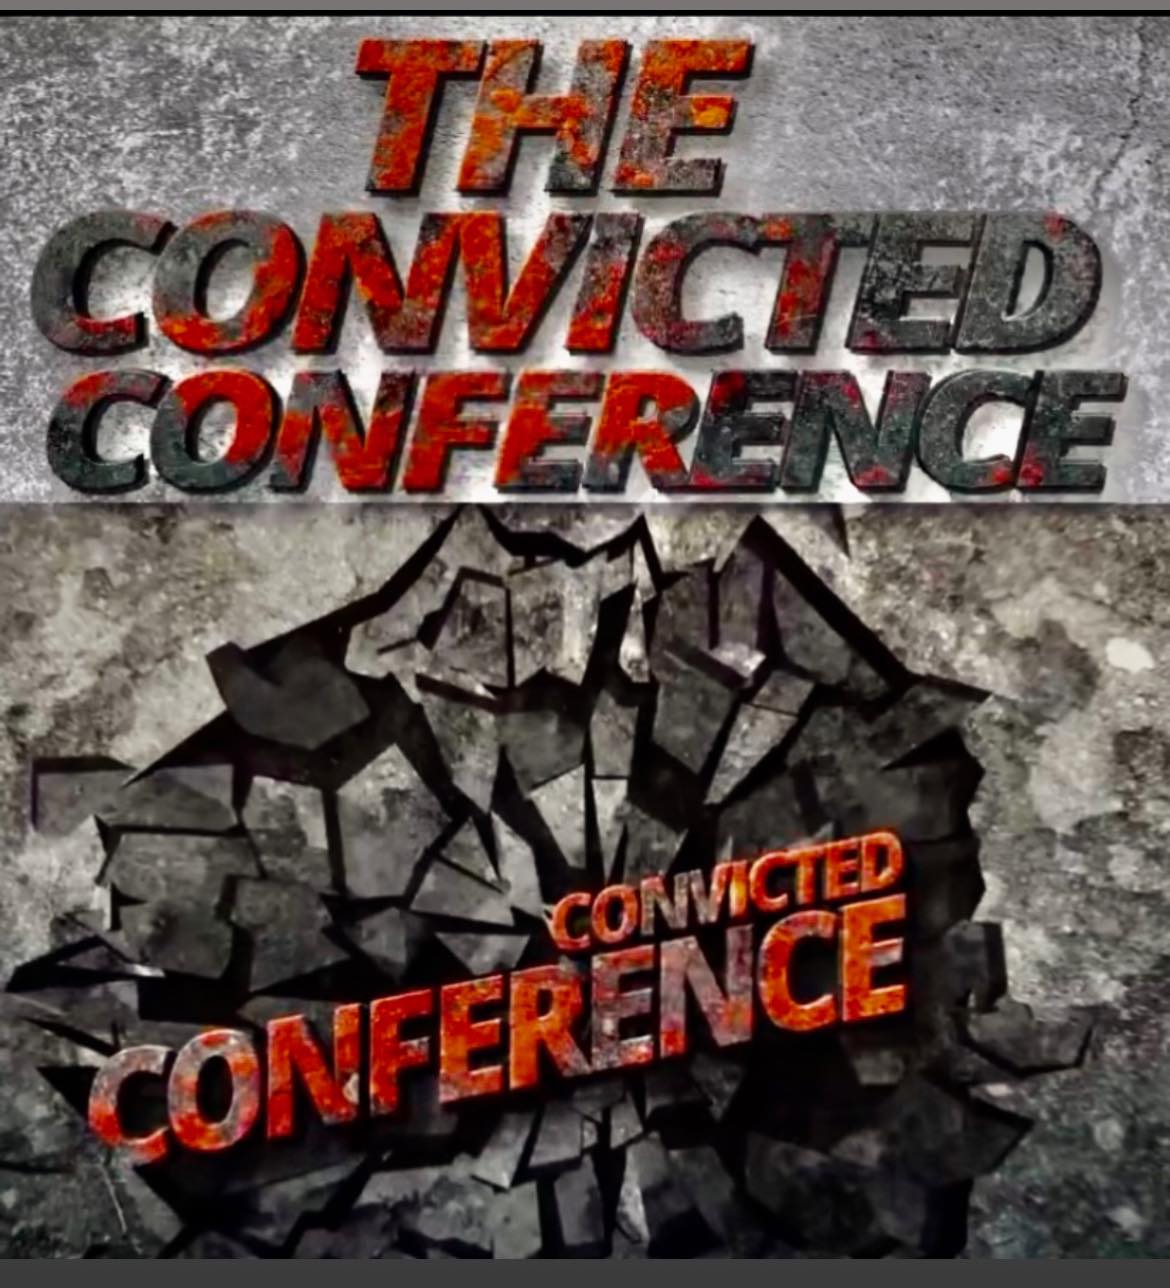 Convicted Conference